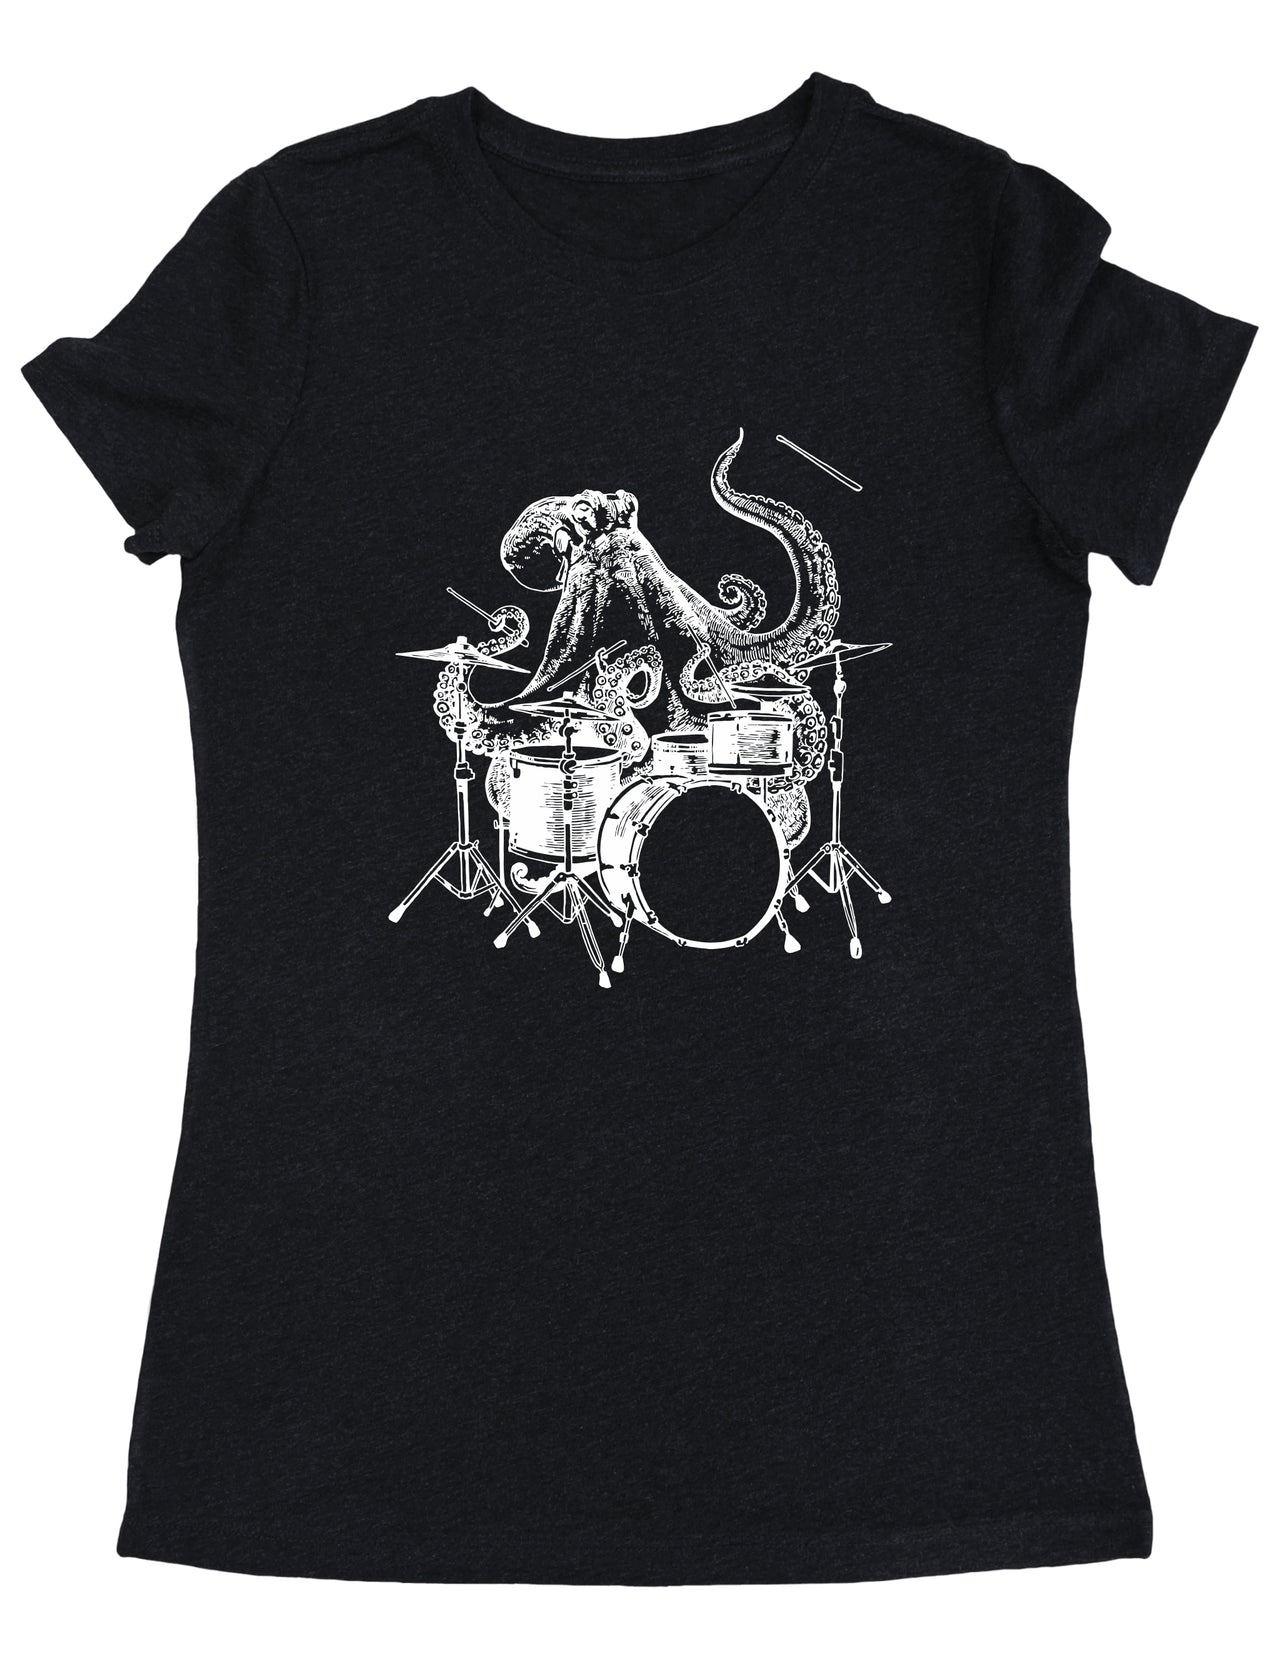 SEEMBO Octopus Playing Drums Women's Tri-Blend T-Shirt